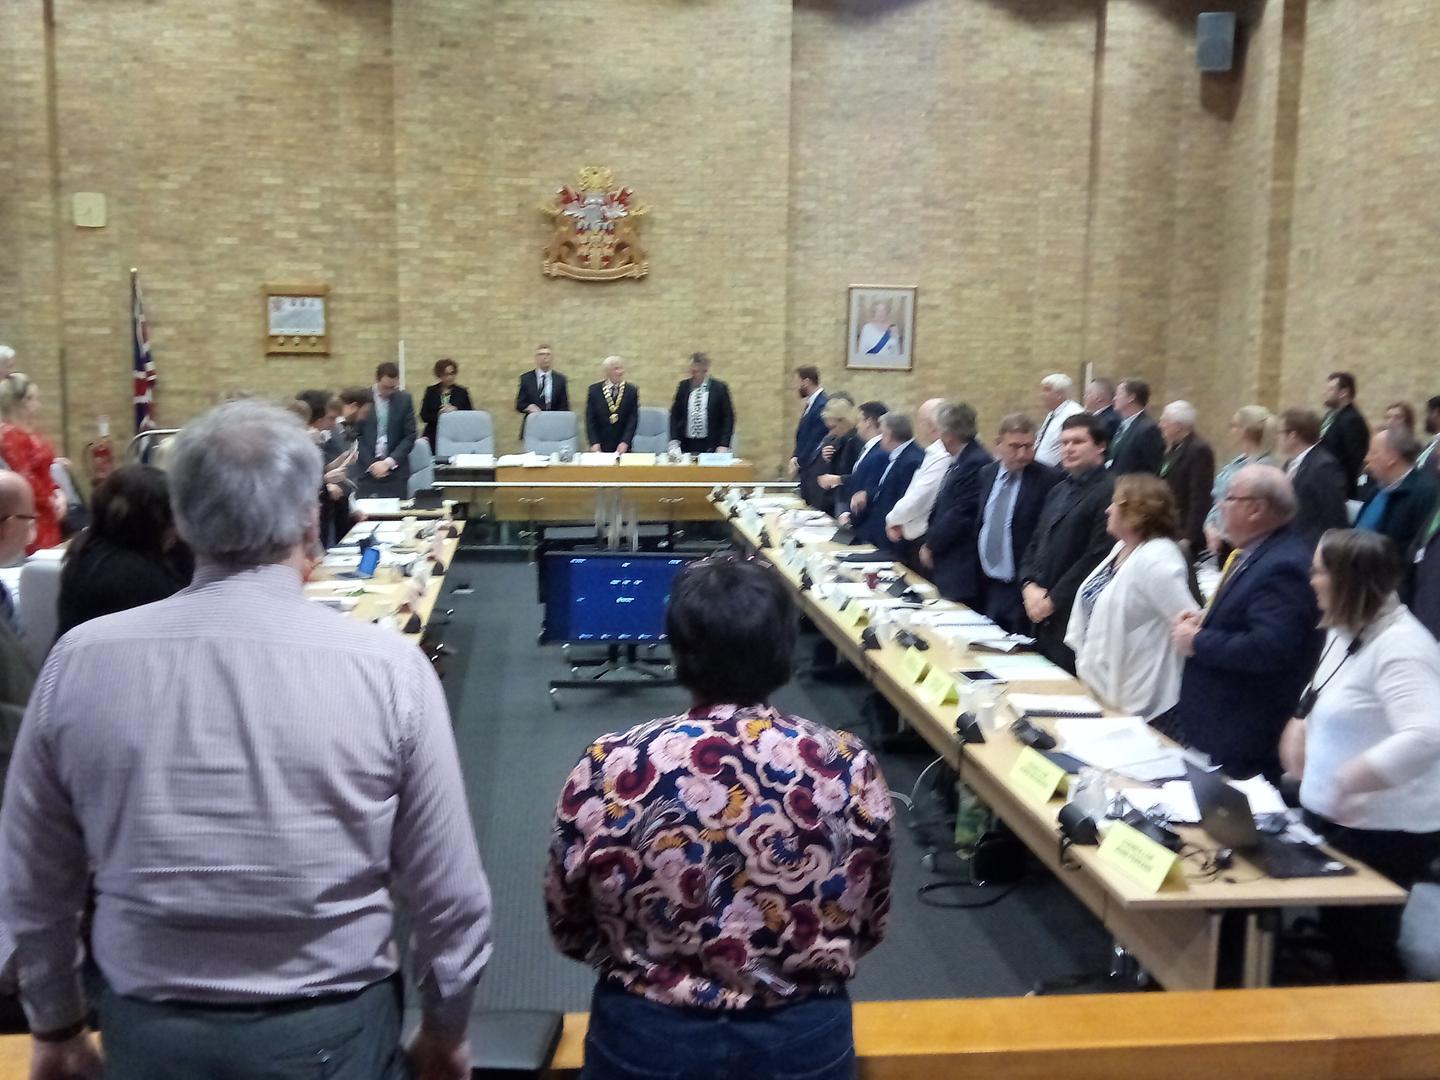 One of the formalities of meetings of the full council is that everyone stands up when the mayor arrives to take his seat at the top table. This year's Mayor of Milton Keynes is Cllr Sam Crooks (Lib Dem, Broughton).